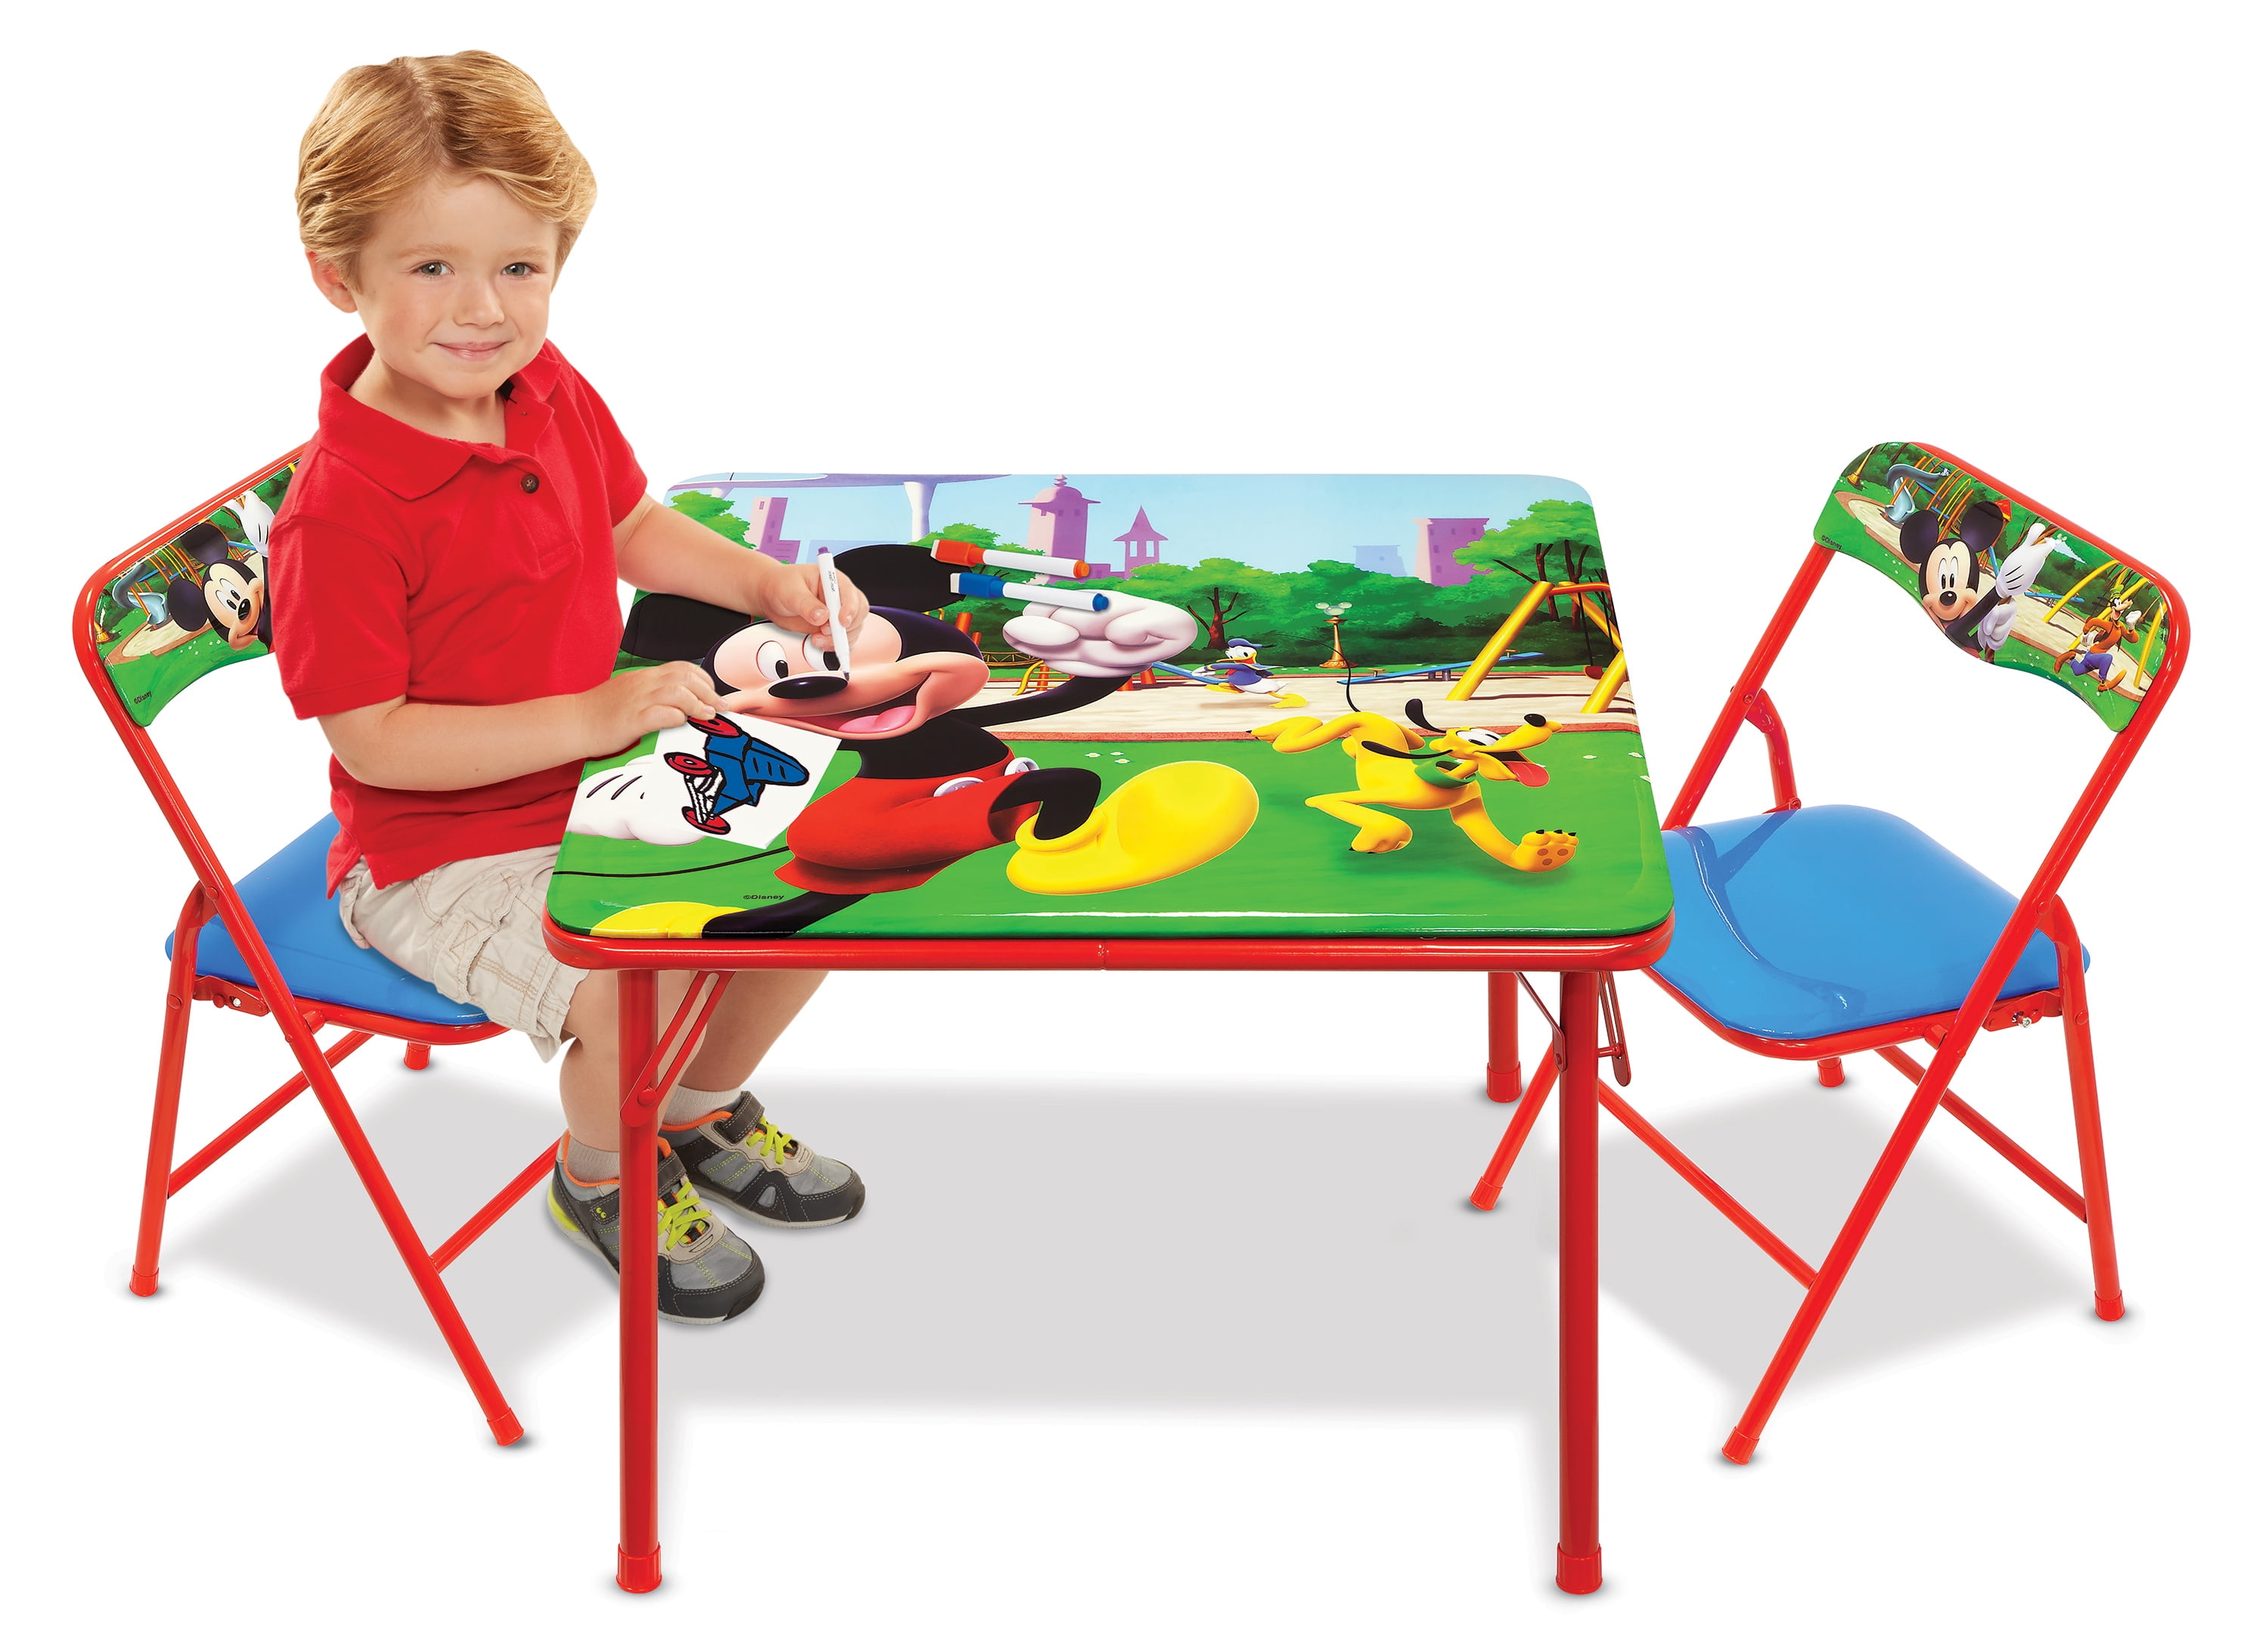 mickey mouse table and chairs target